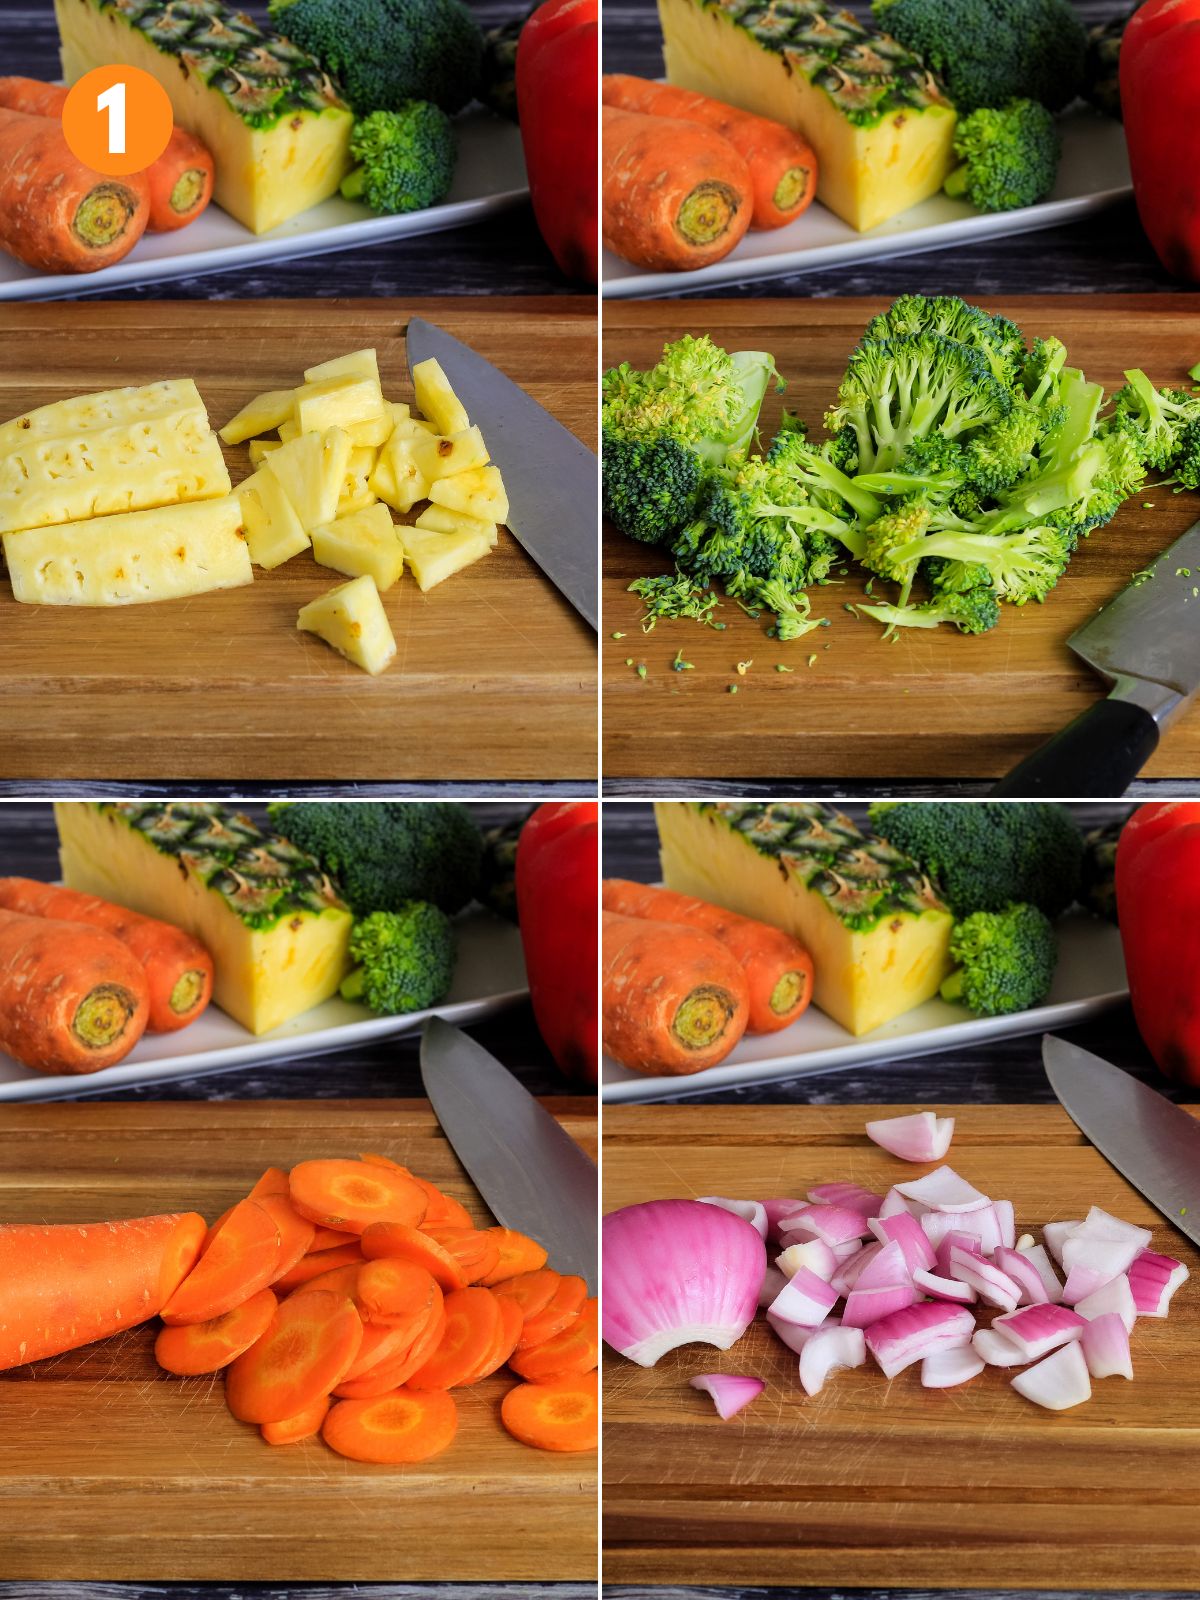 Collage of vegetables on cutting board to demonstrate the best shape and size to cut for stir fry.